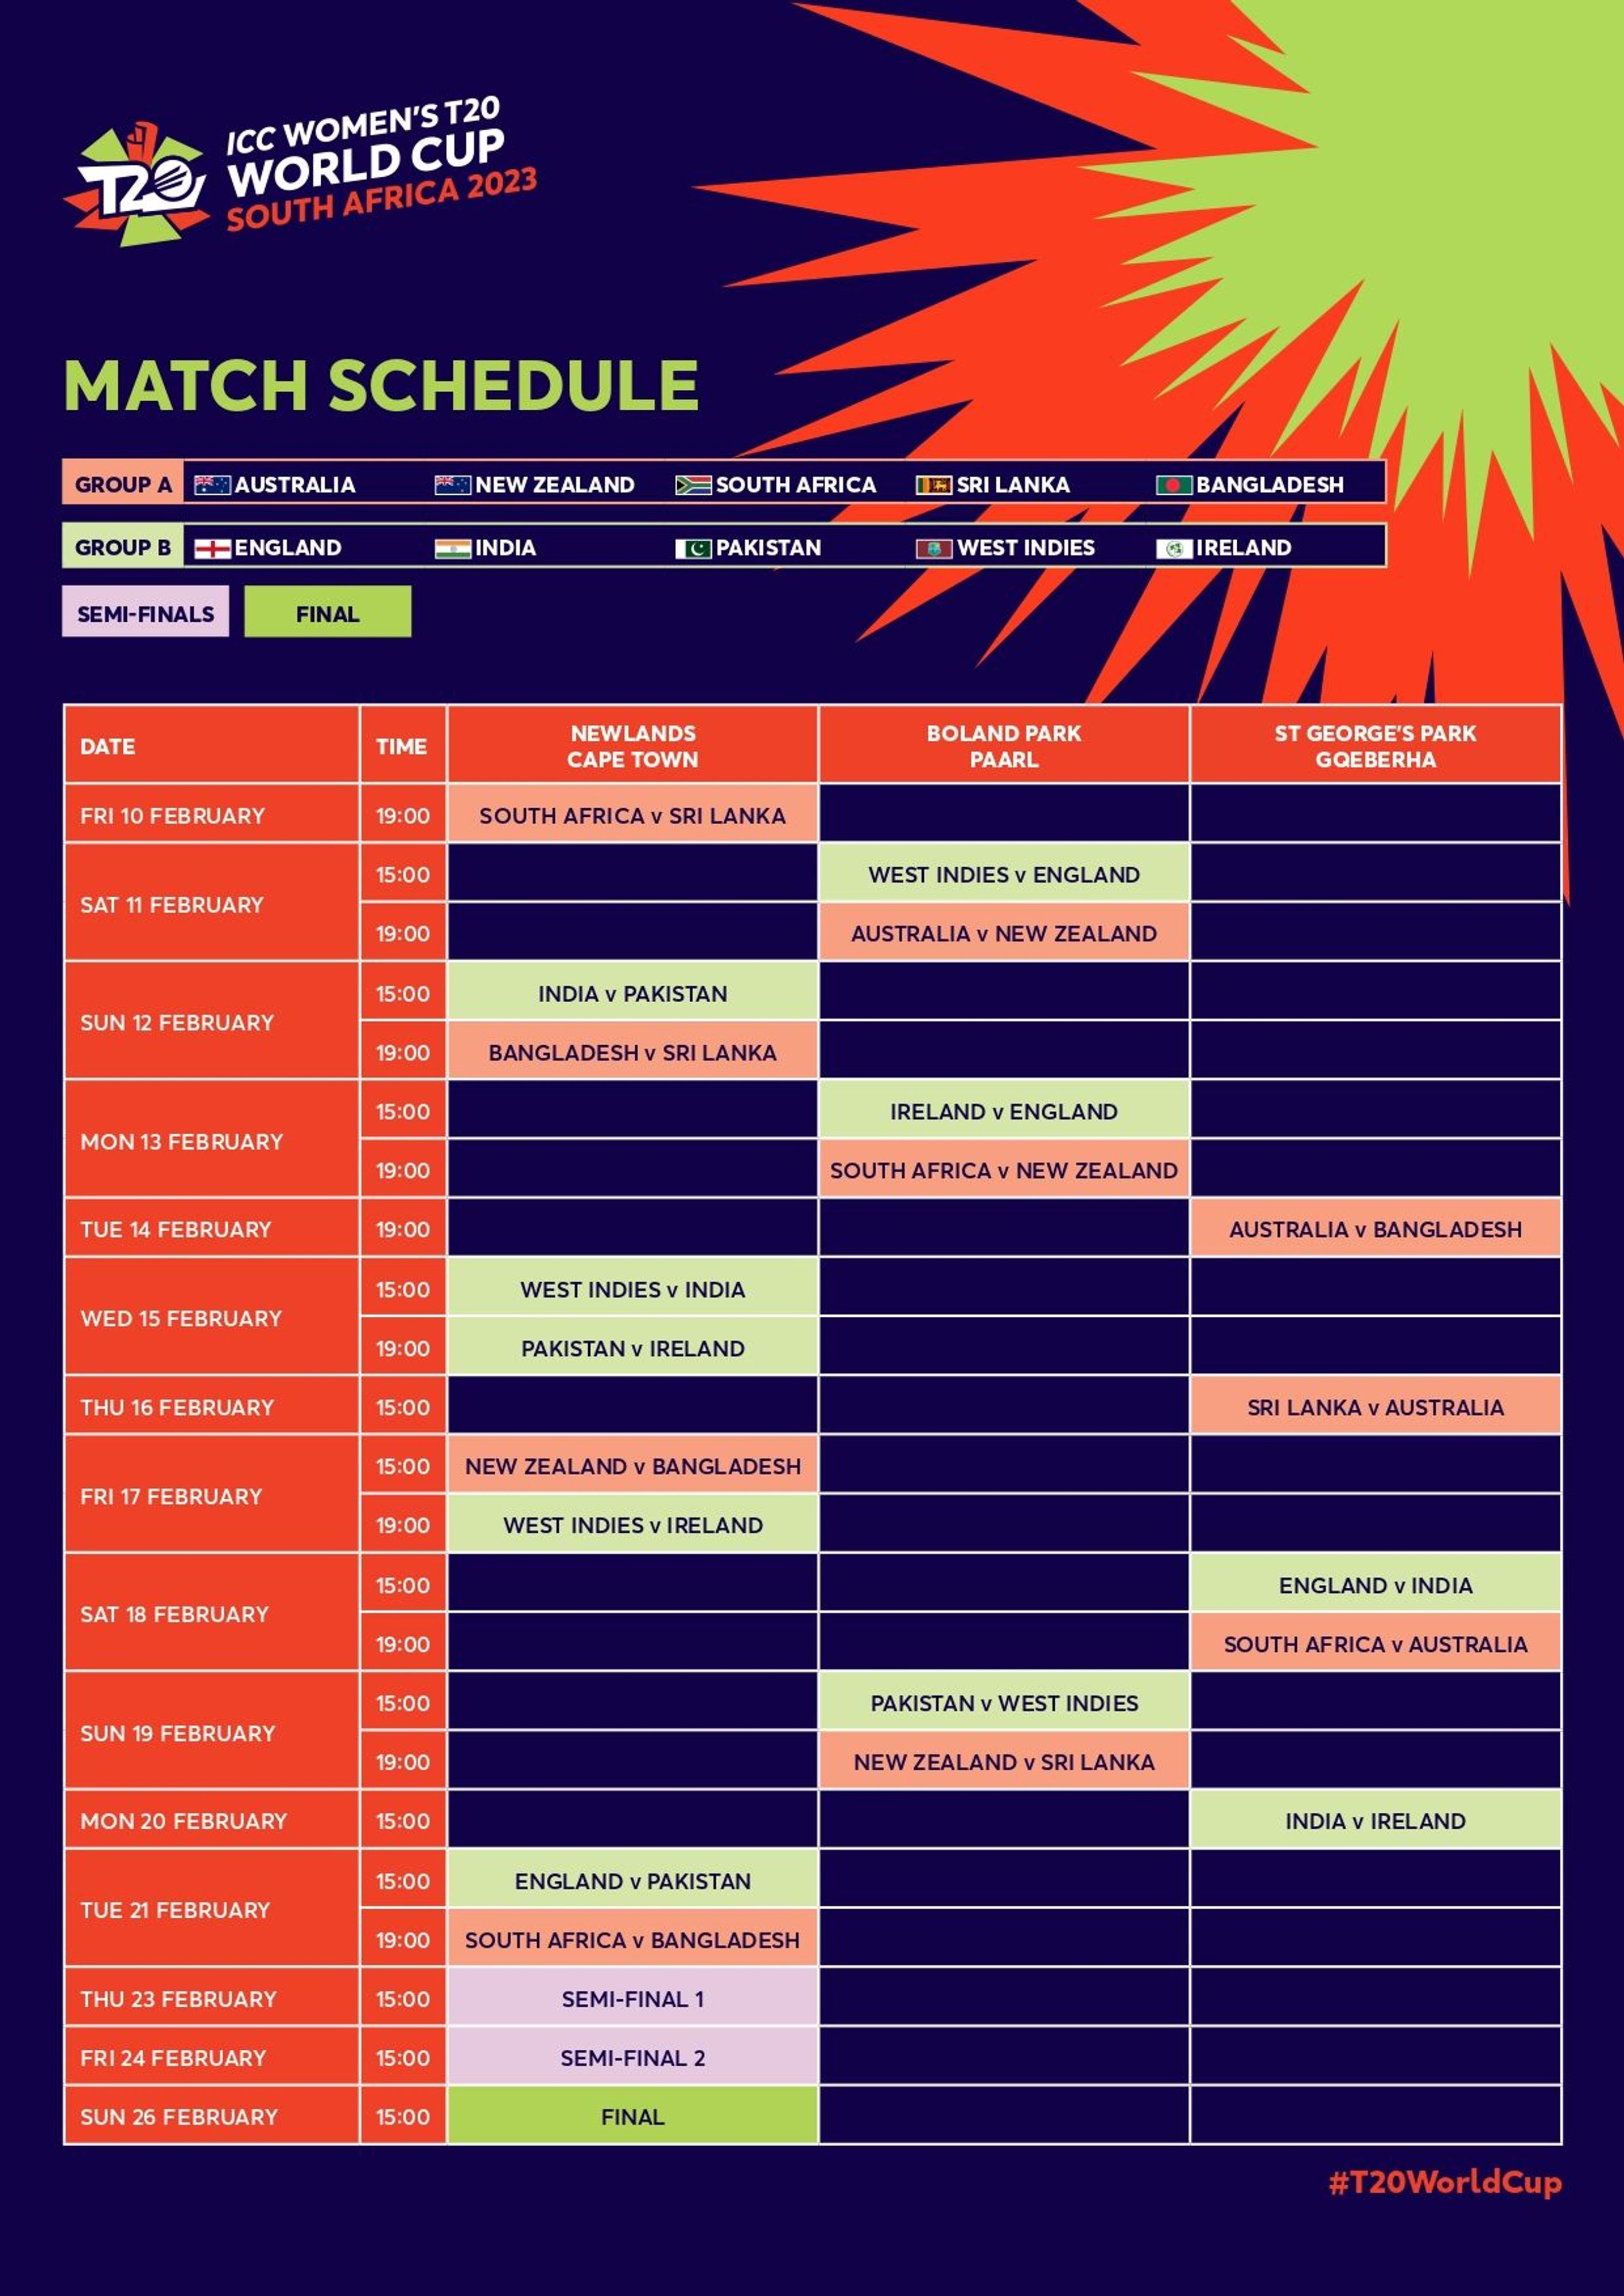 ICC Womens T20 World Cup 2023 match schedule released